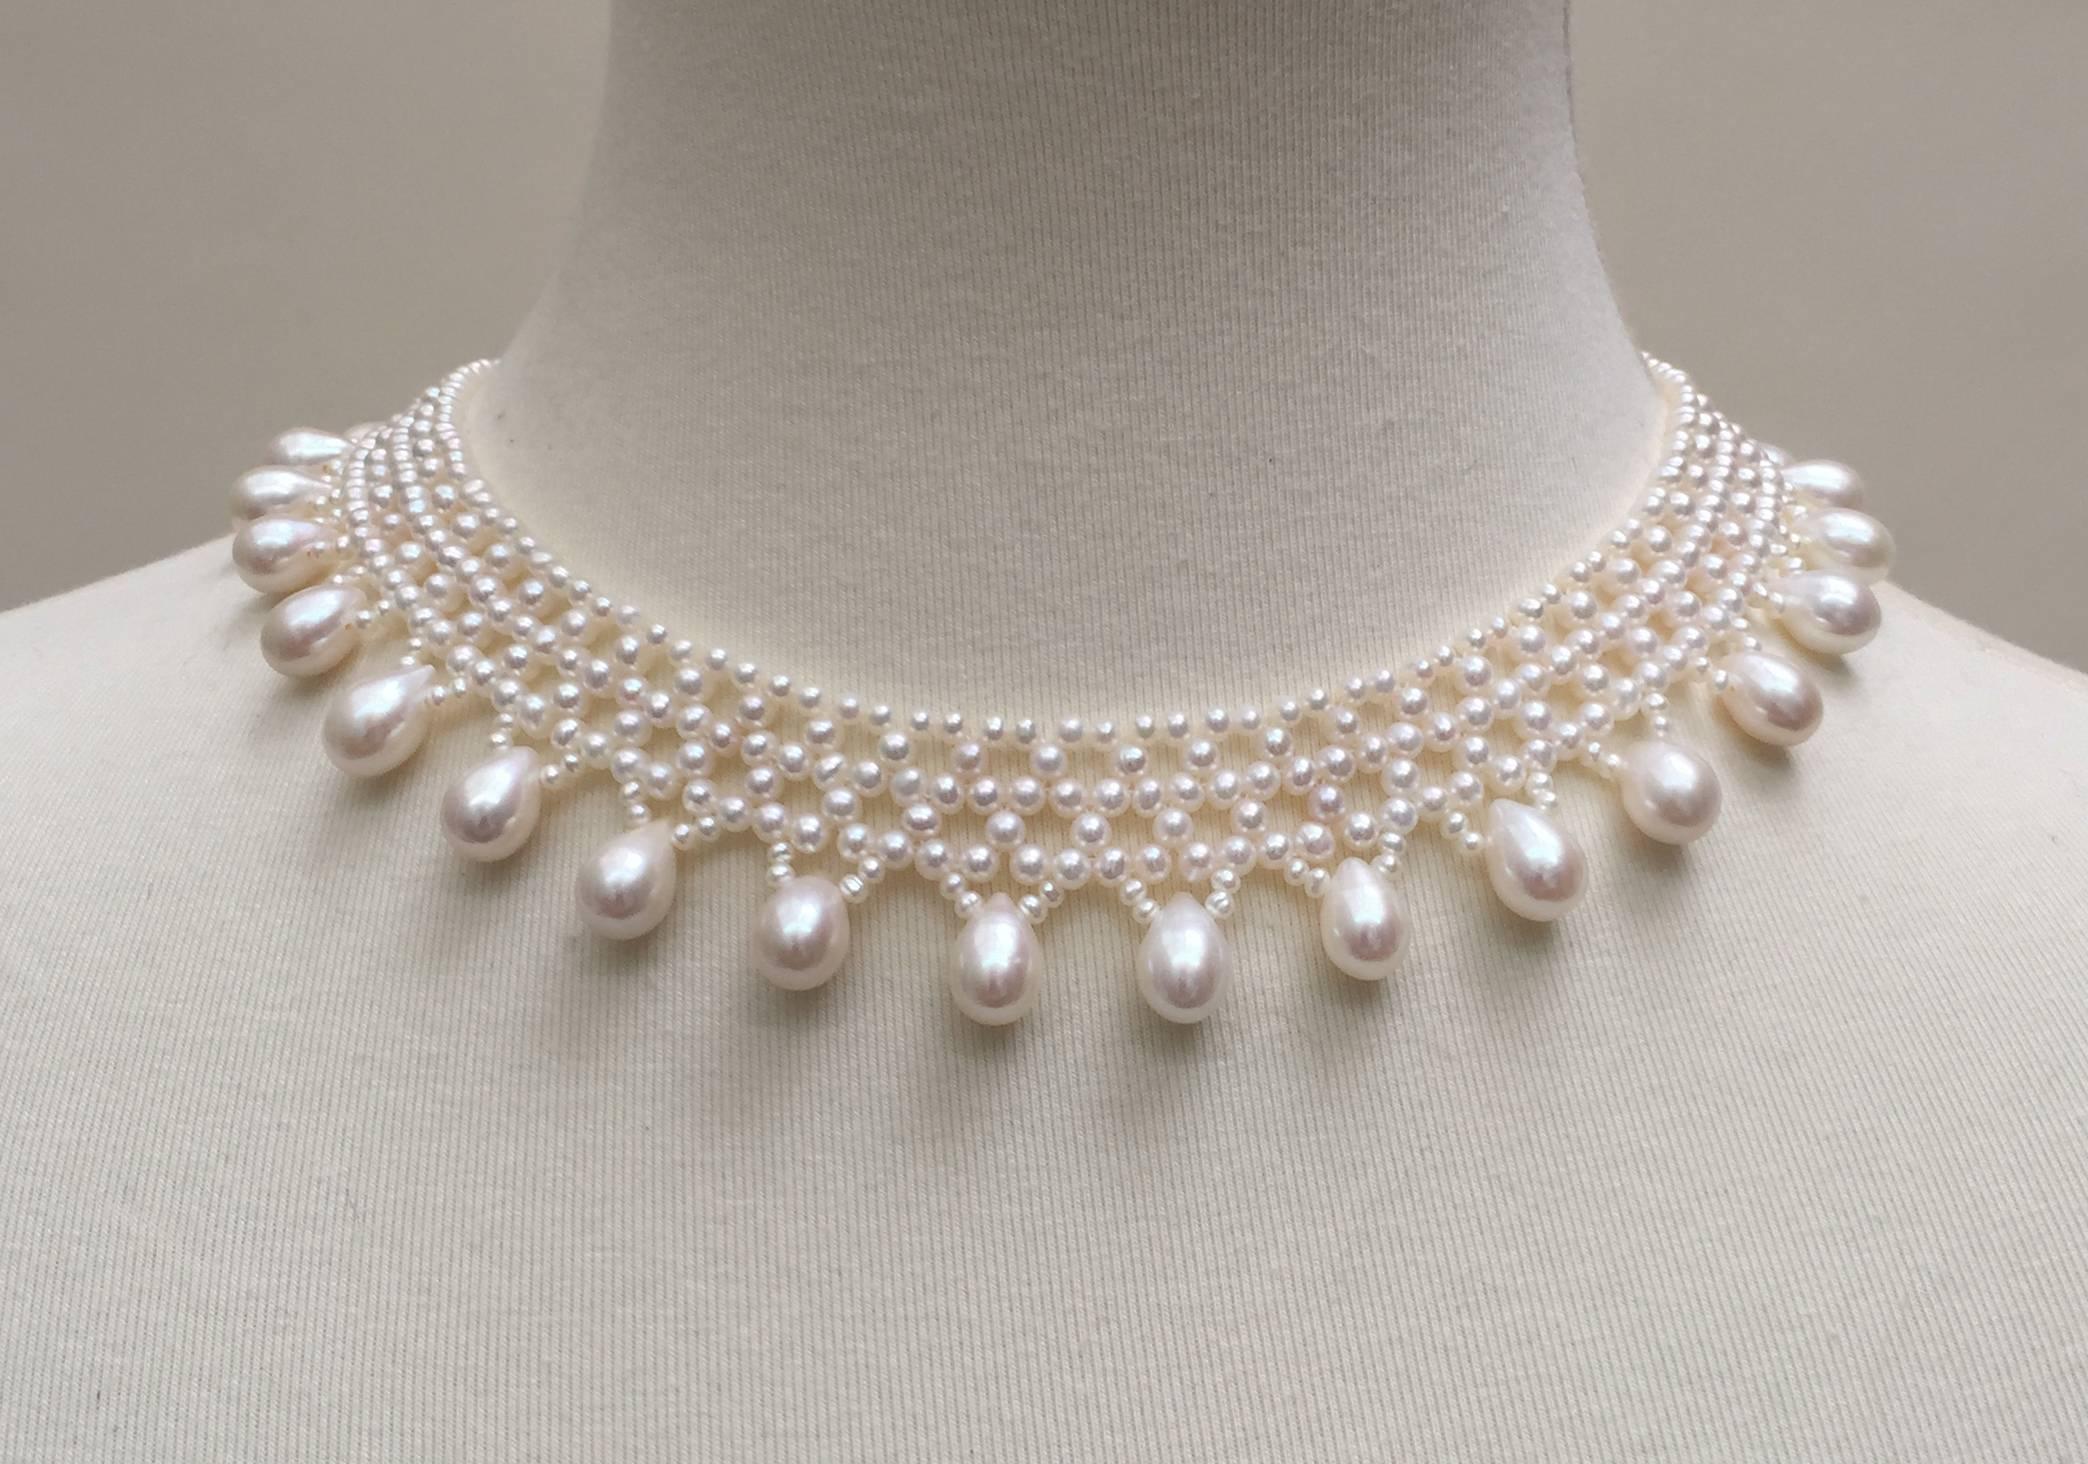   Marina J  Woven Pearl Necklace with Pear-Shaped Pearl Drops and sliding clasp In New Condition For Sale In Los Angeles, CA